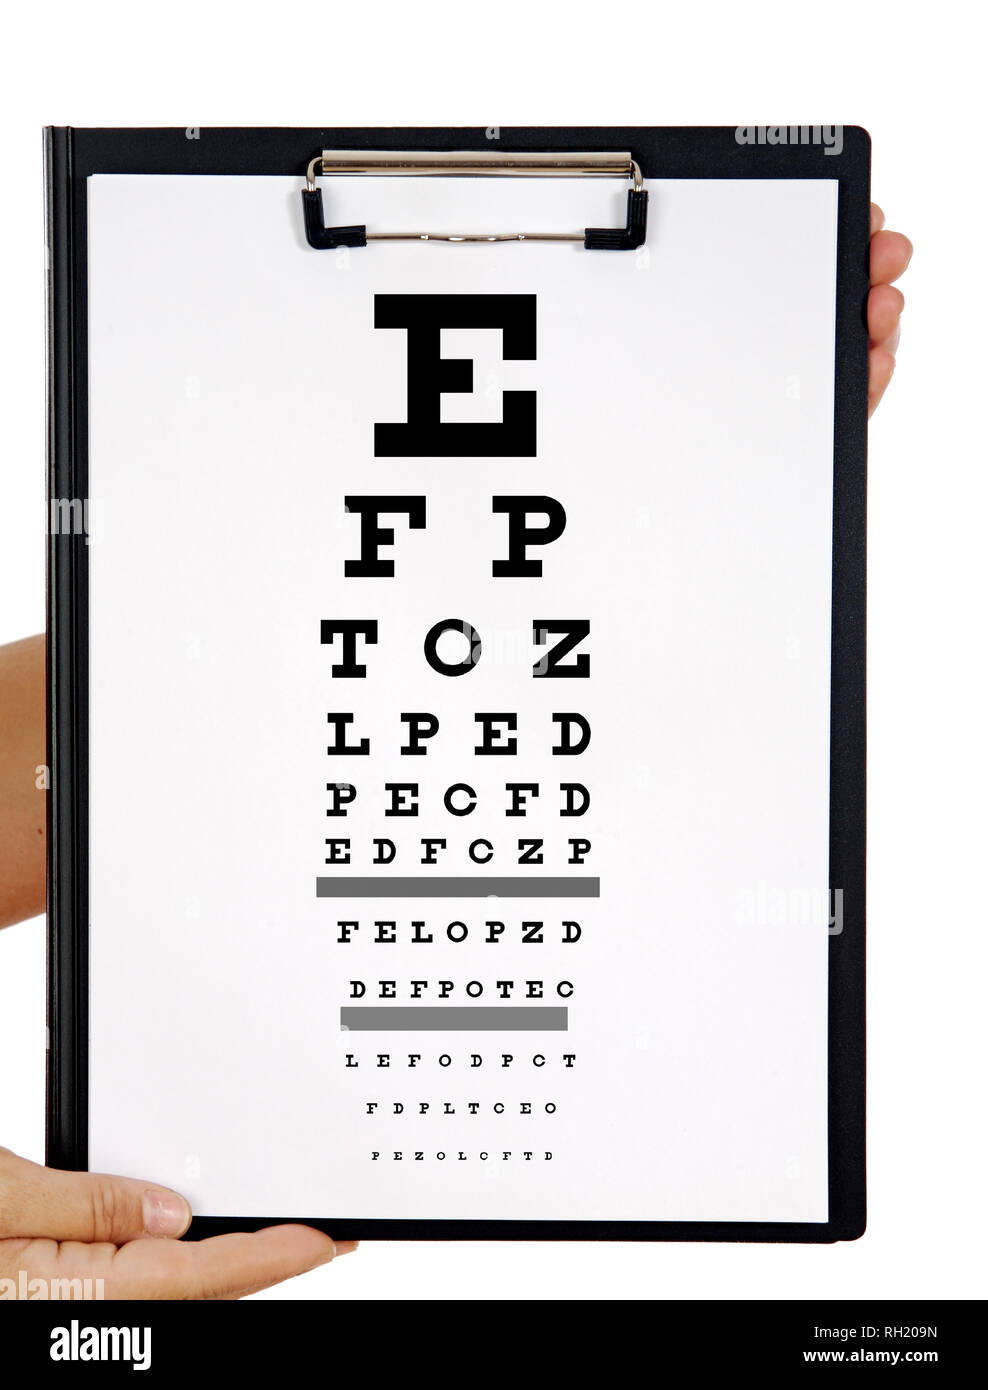 Doctor holding a vision exam chart isolated on a white ...